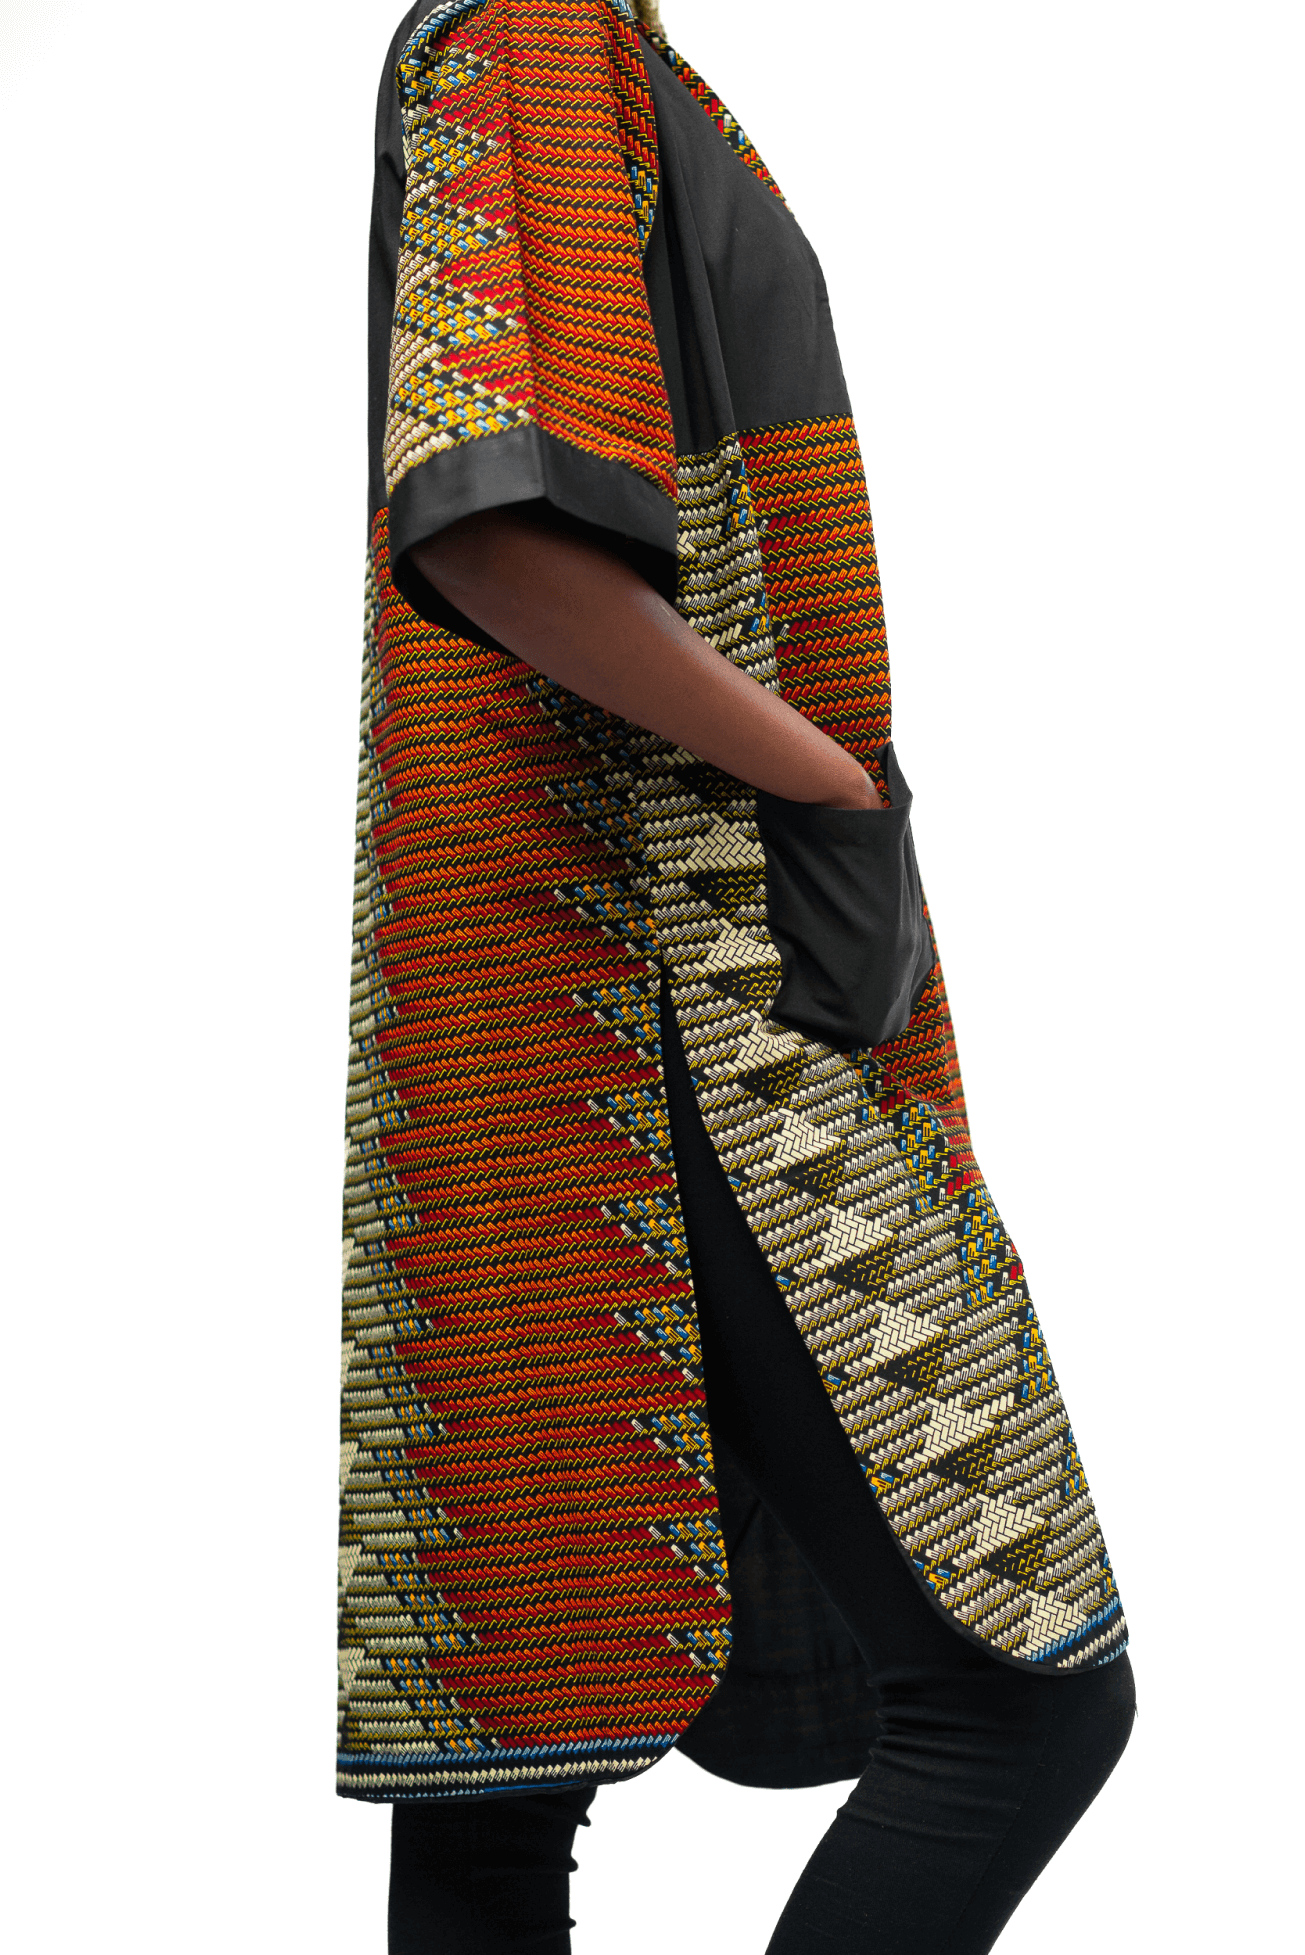 Shop The Matrix Kimono by ELISKIS on Arrai. Discover stylish, affordable clothing, jewelry, handbags and unique handmade pieces from top Kenyan & African fashion brands prioritising sustainability and quality craftsmanship.